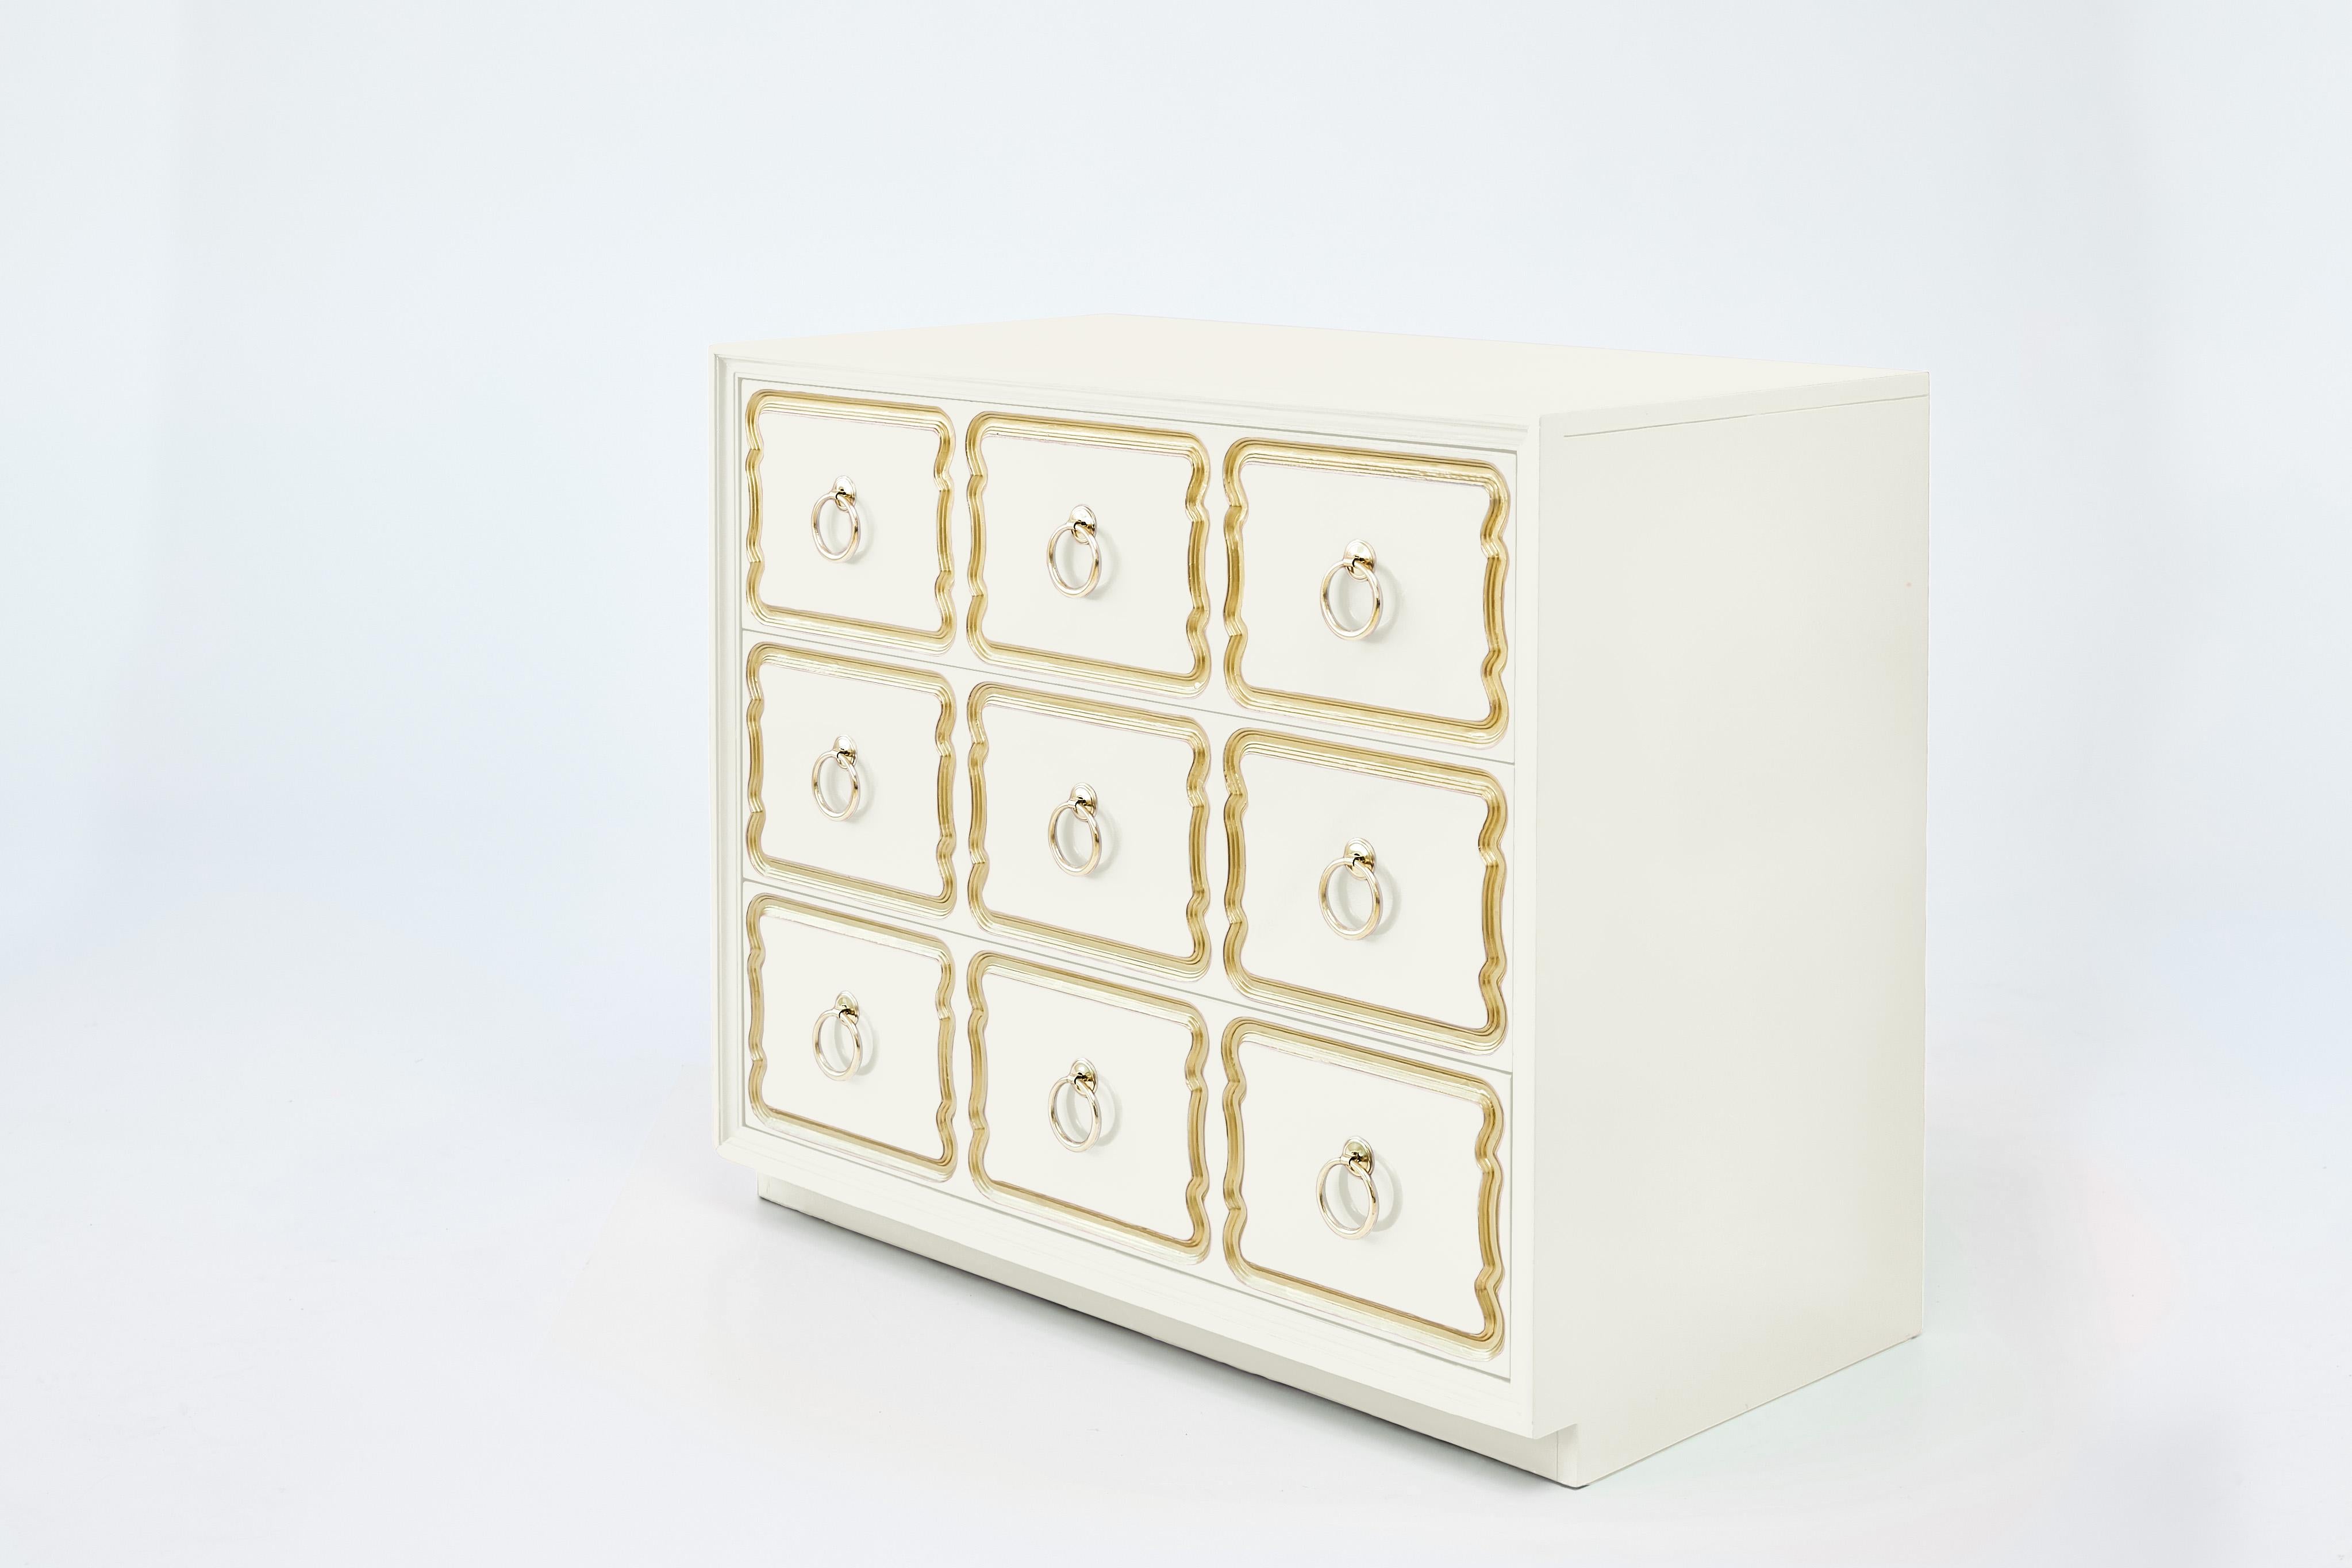 Hollywood Regency Authentic Dorothy Draper España Chest in Ivory White Chocolate, circa 1955 For Sale